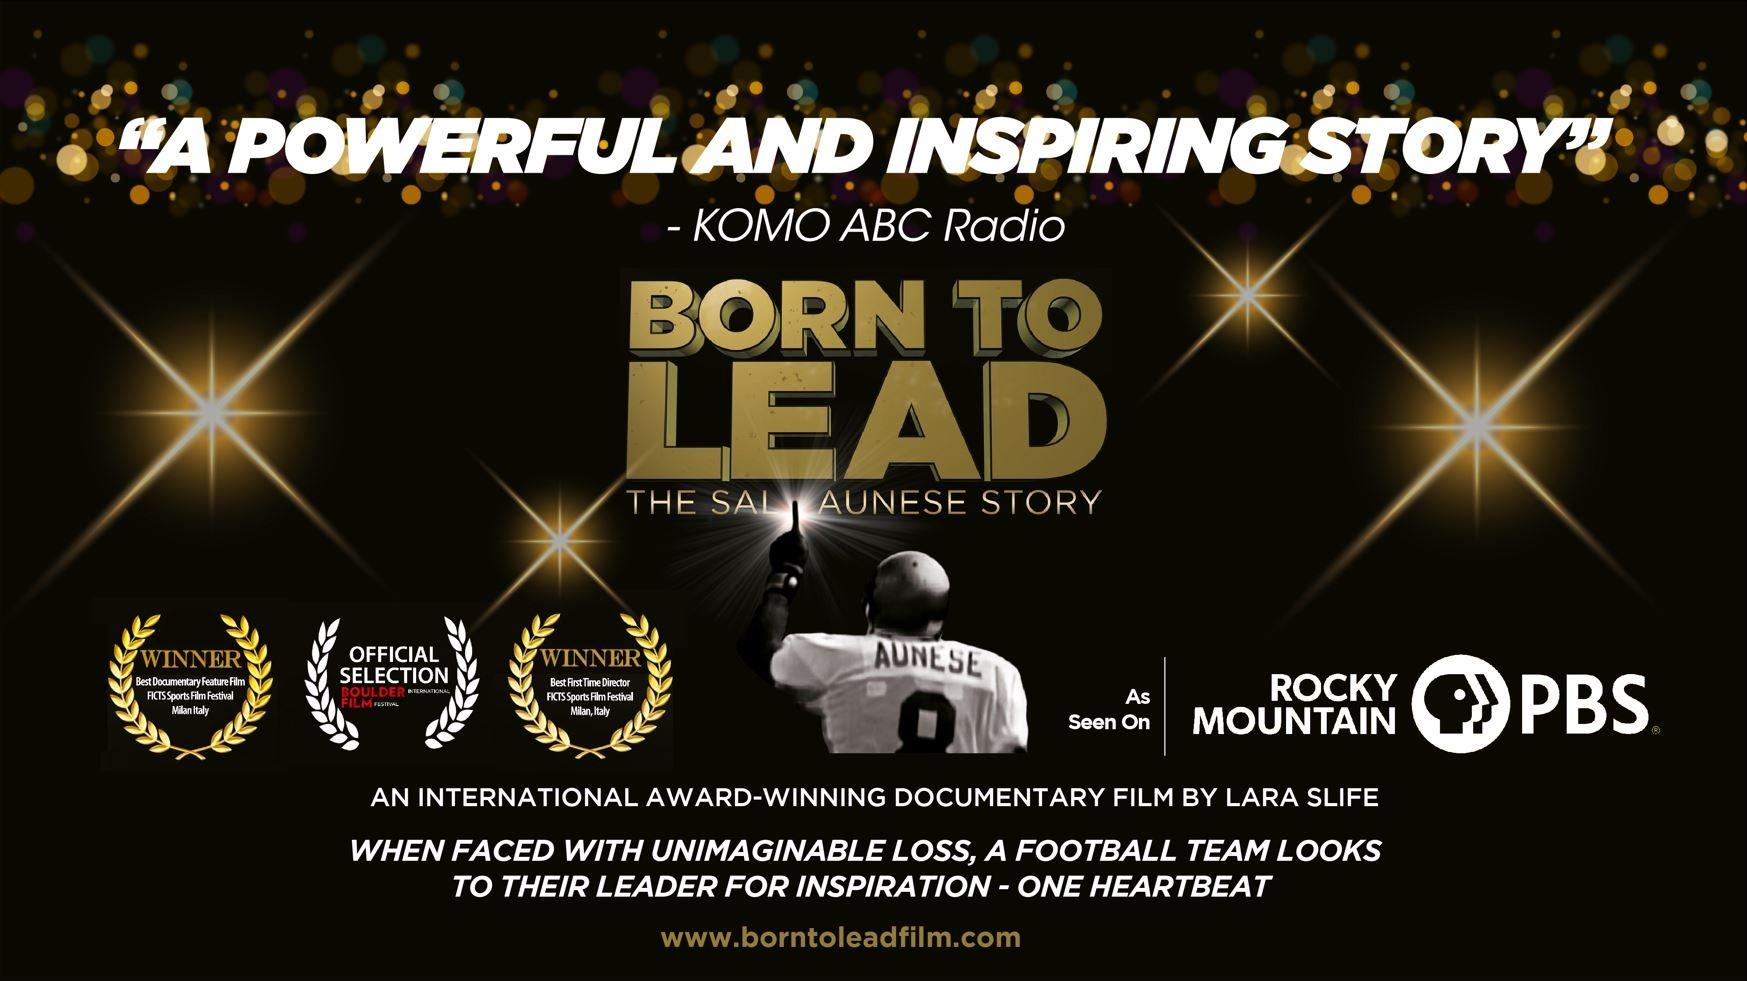 RMPBS Presents, Born to Lead: The Sal Aunese Story